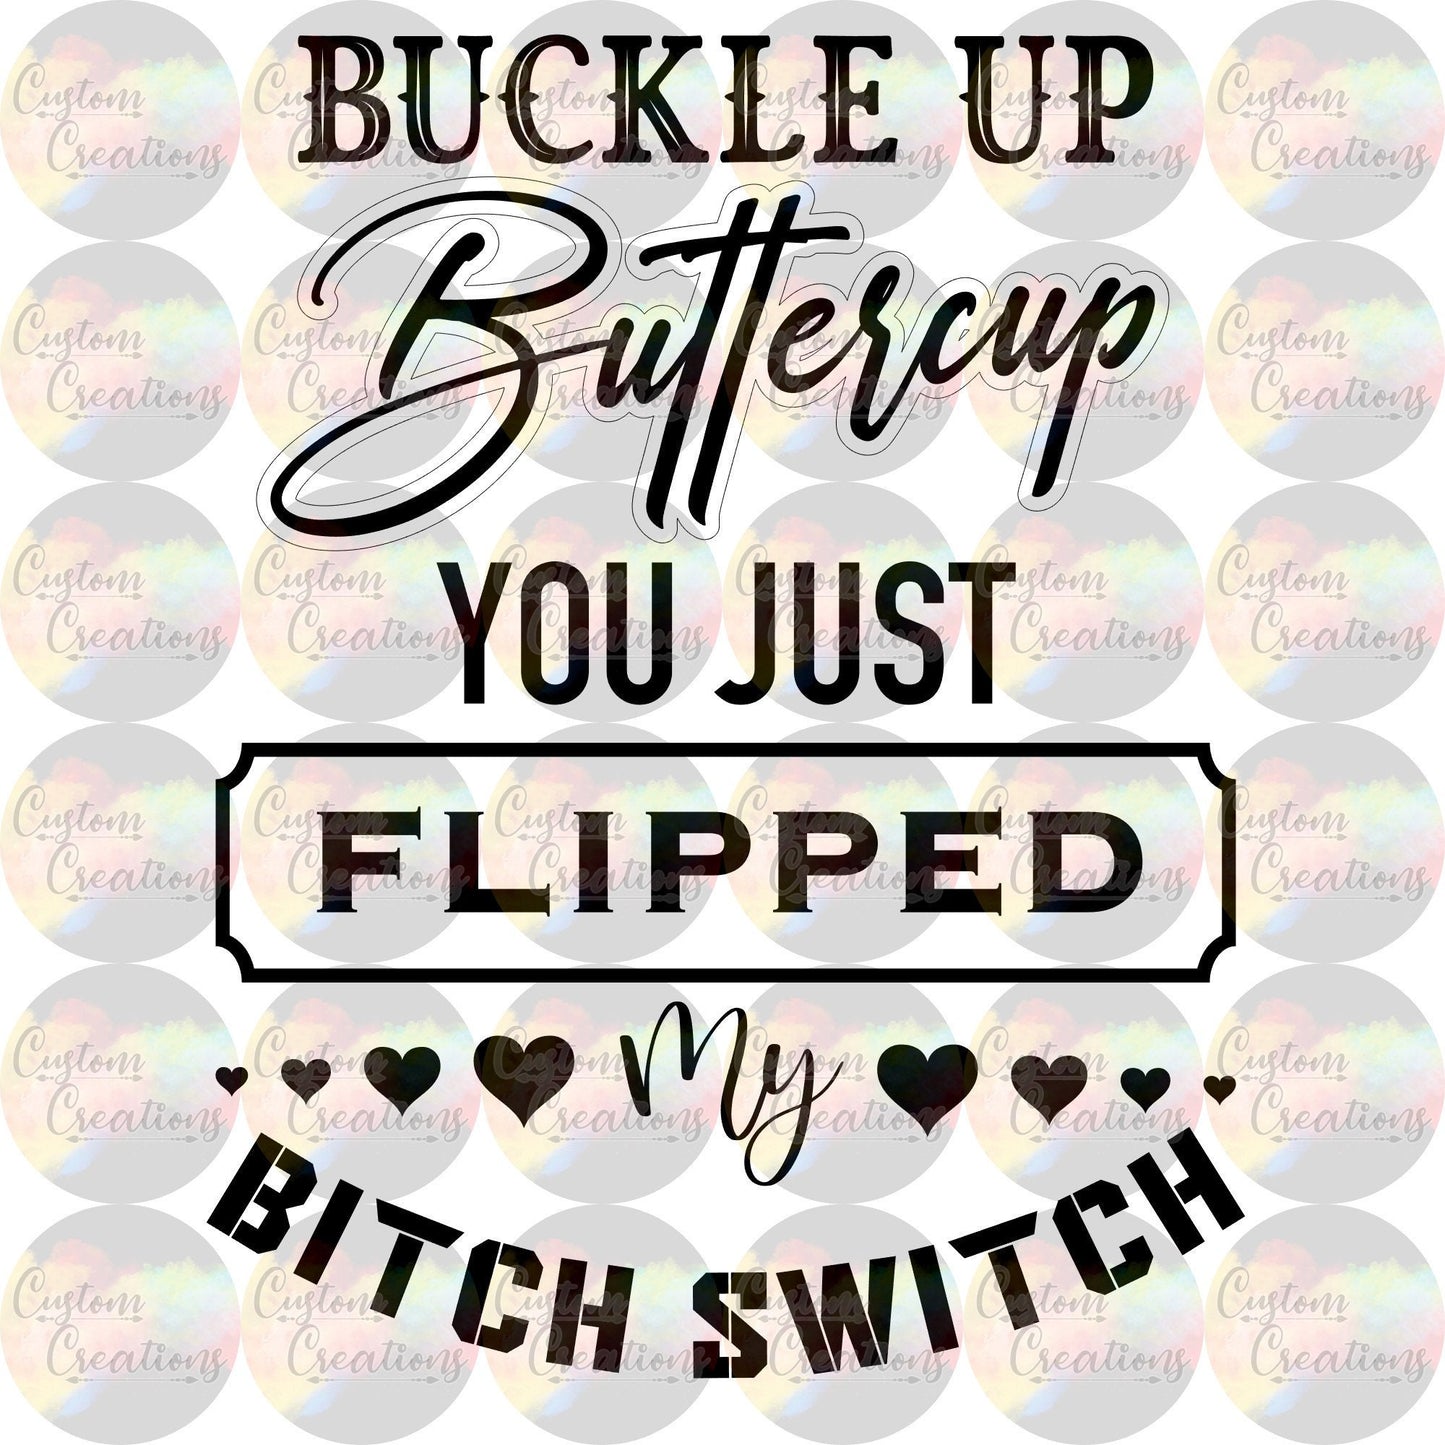 Buckle Up Buttercup You Just Flipped My Bitch Switch File Download JPEG, PNG, & SVG